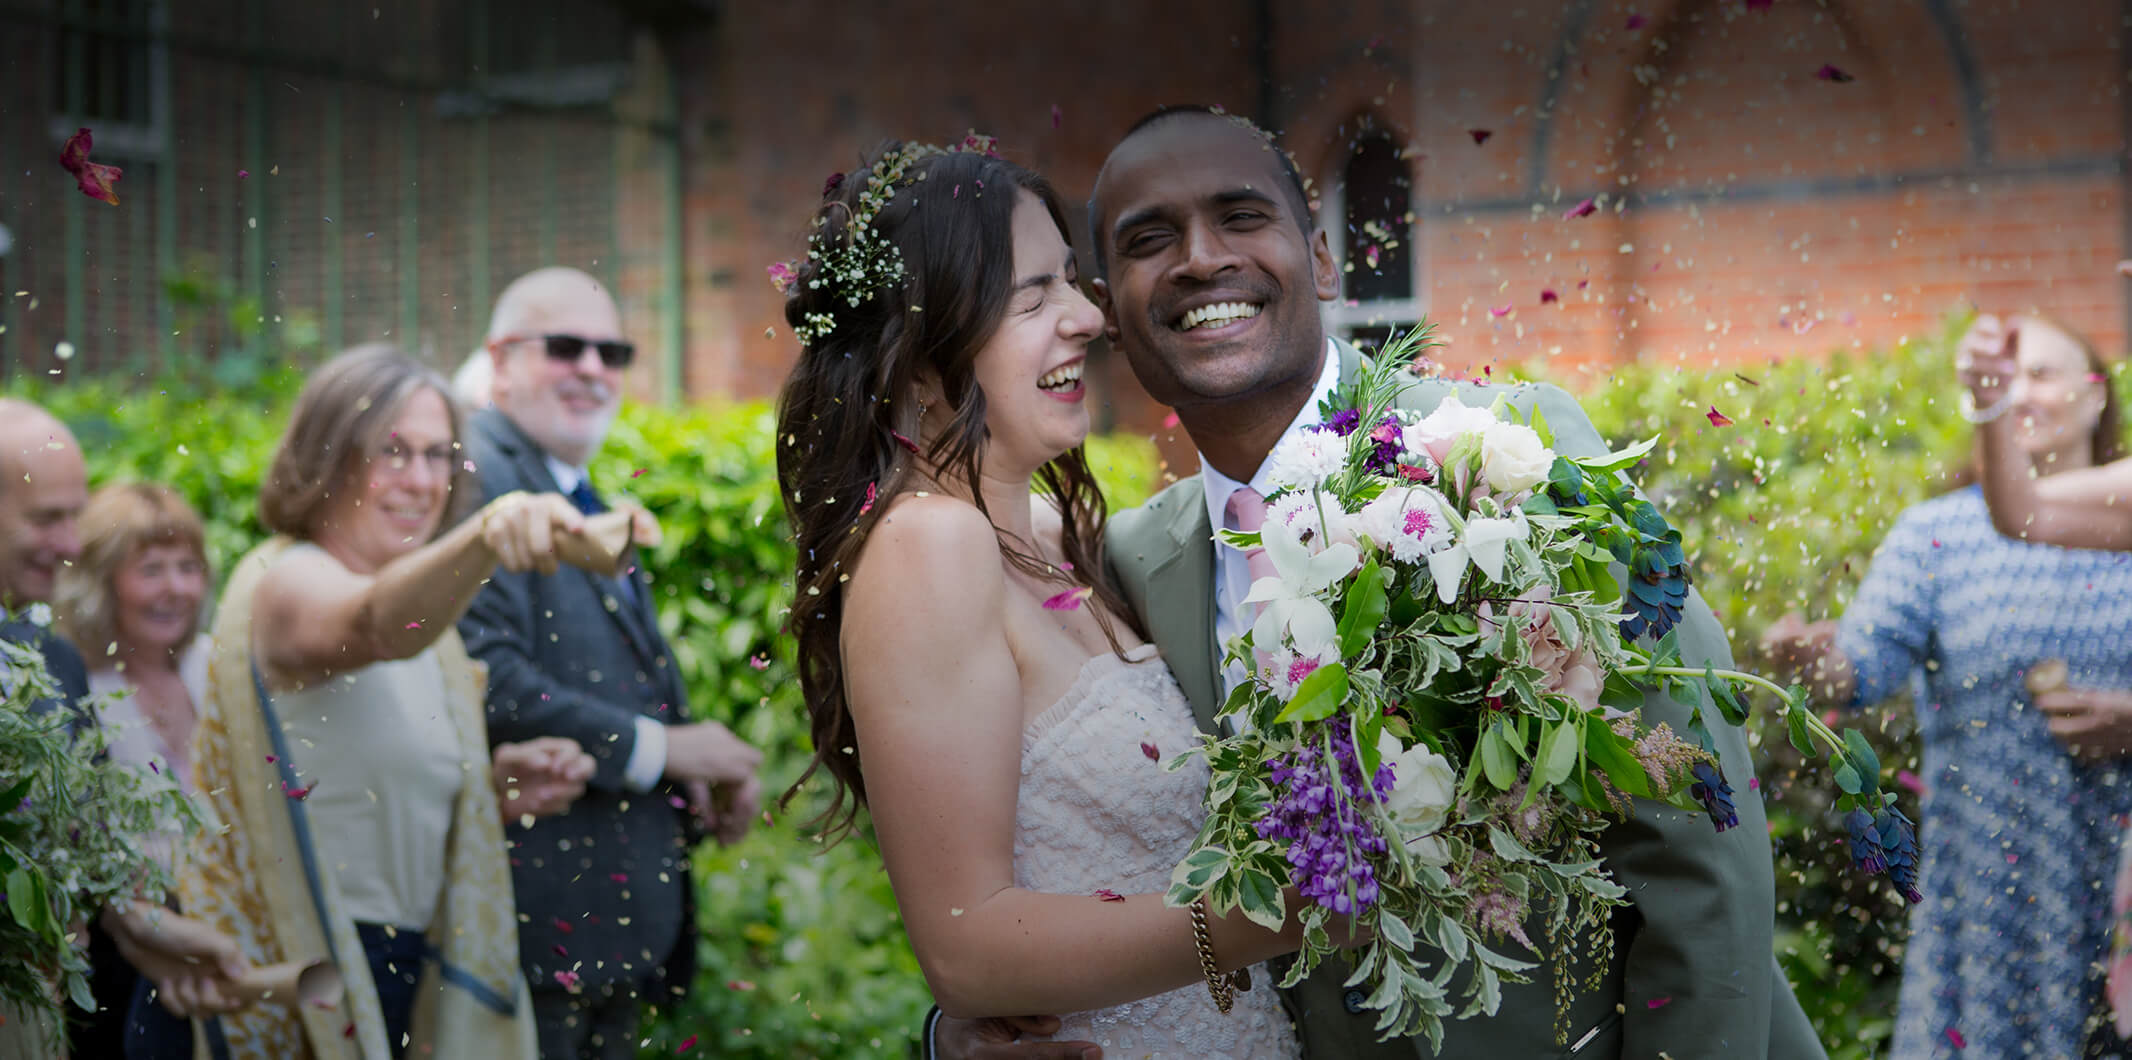 A bride and groom smile while confetti is thrown on them